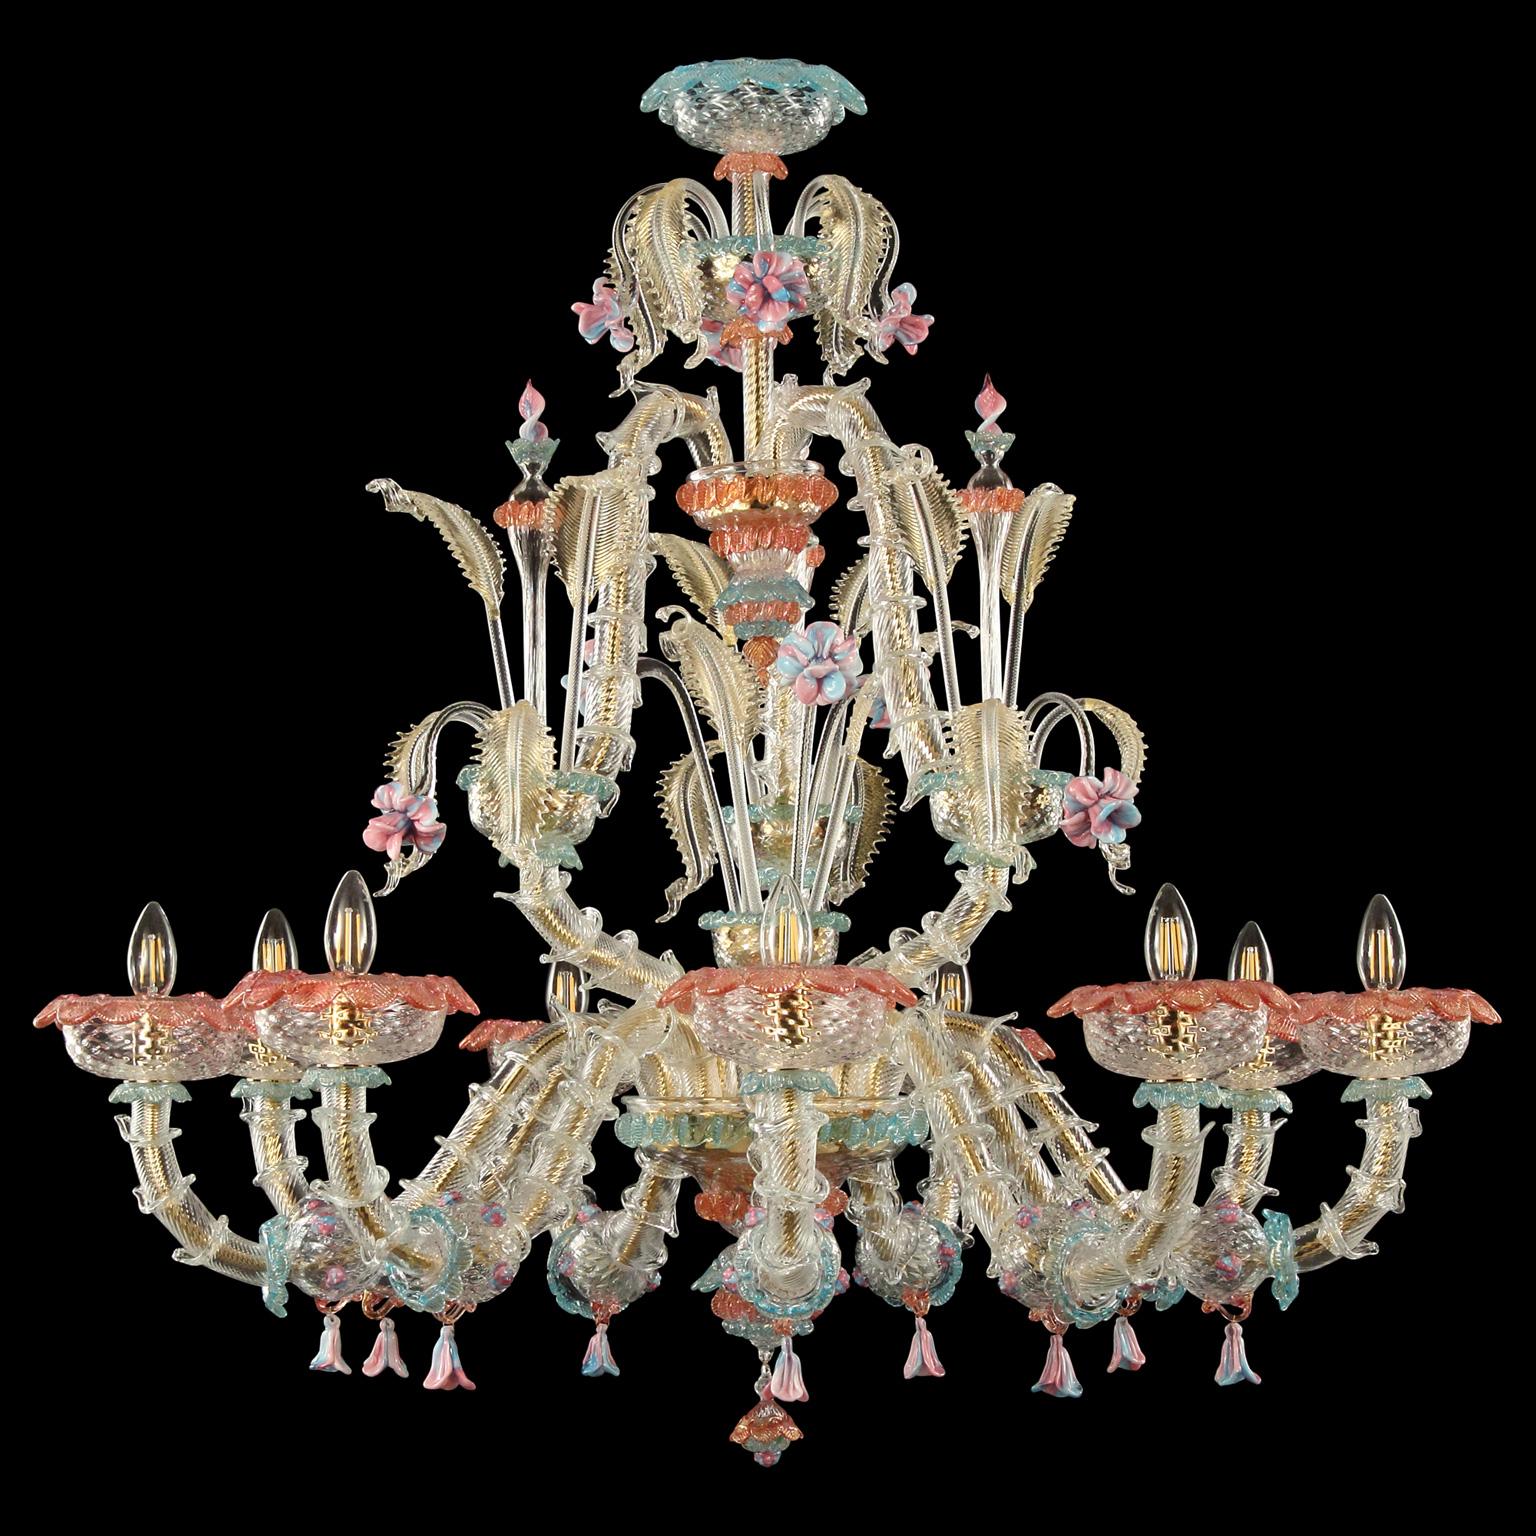 Caesar chandelier 9 arms, crystal and gold, vitreous paste flowers, details in pink and light blue by Multiforme
The name, as well as the structure evokes the splendour of the past centuries. It is an evergreen model, a Classic product manufactured